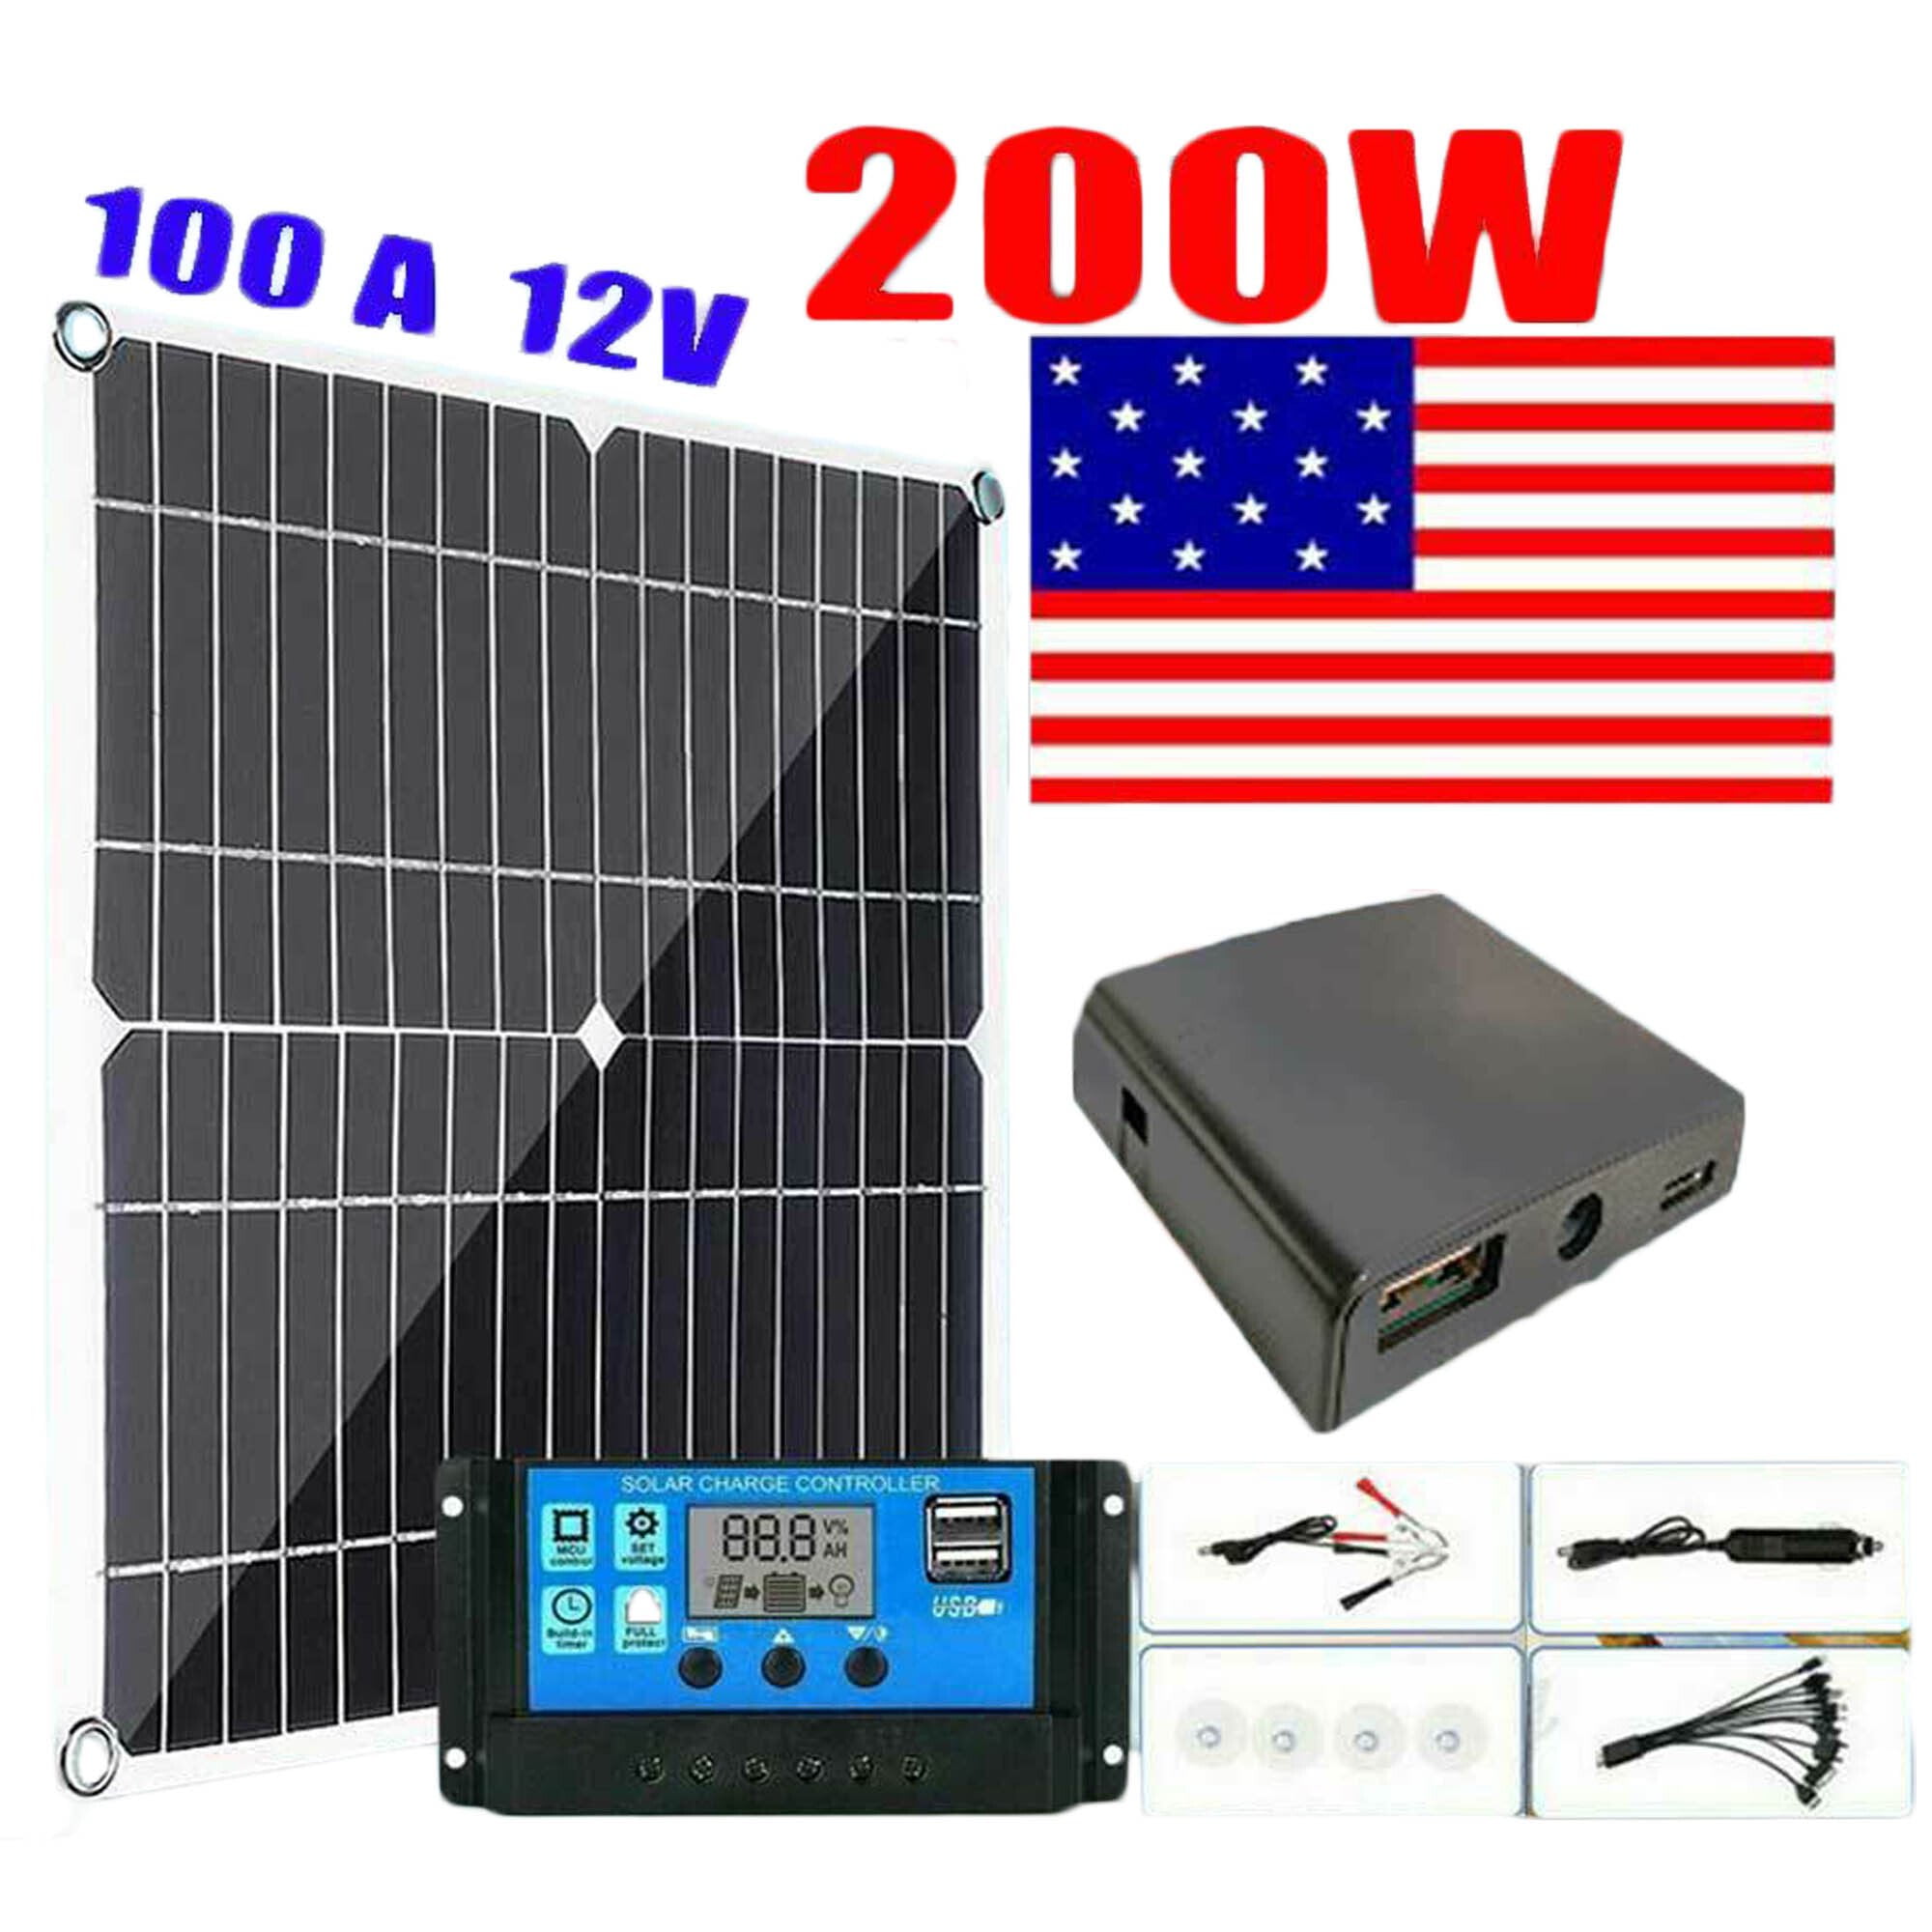 200W Solar Panel Kit 100A 12V battery Charger Controller Caravan Boat Outdoor 